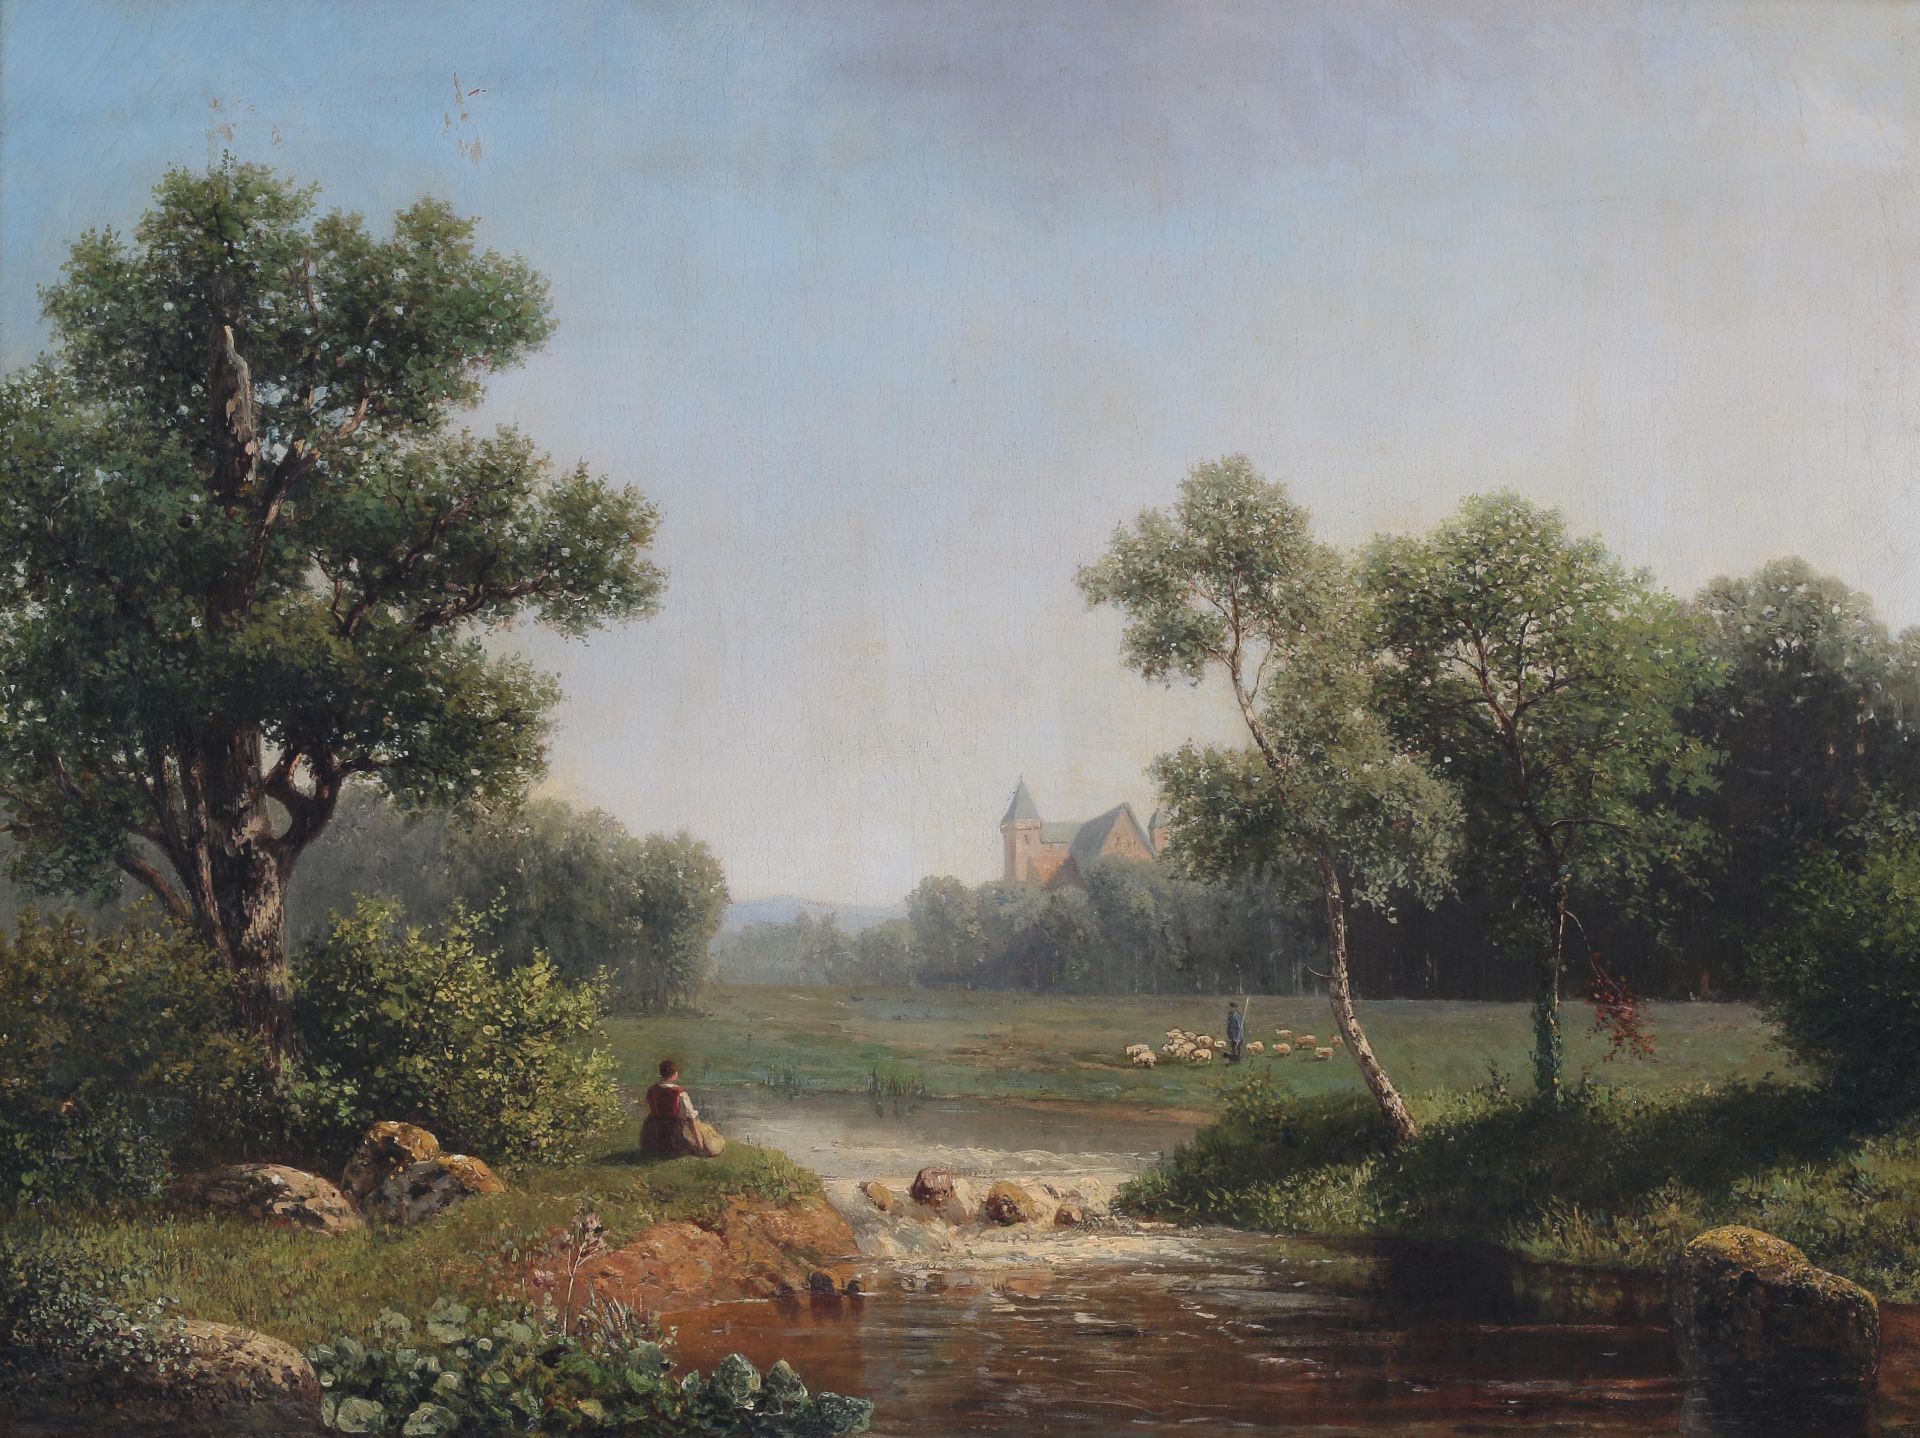 Gerrit Westendorp (1821-1877) Landscape with a seated lady and a shepherd with his flock by a river.